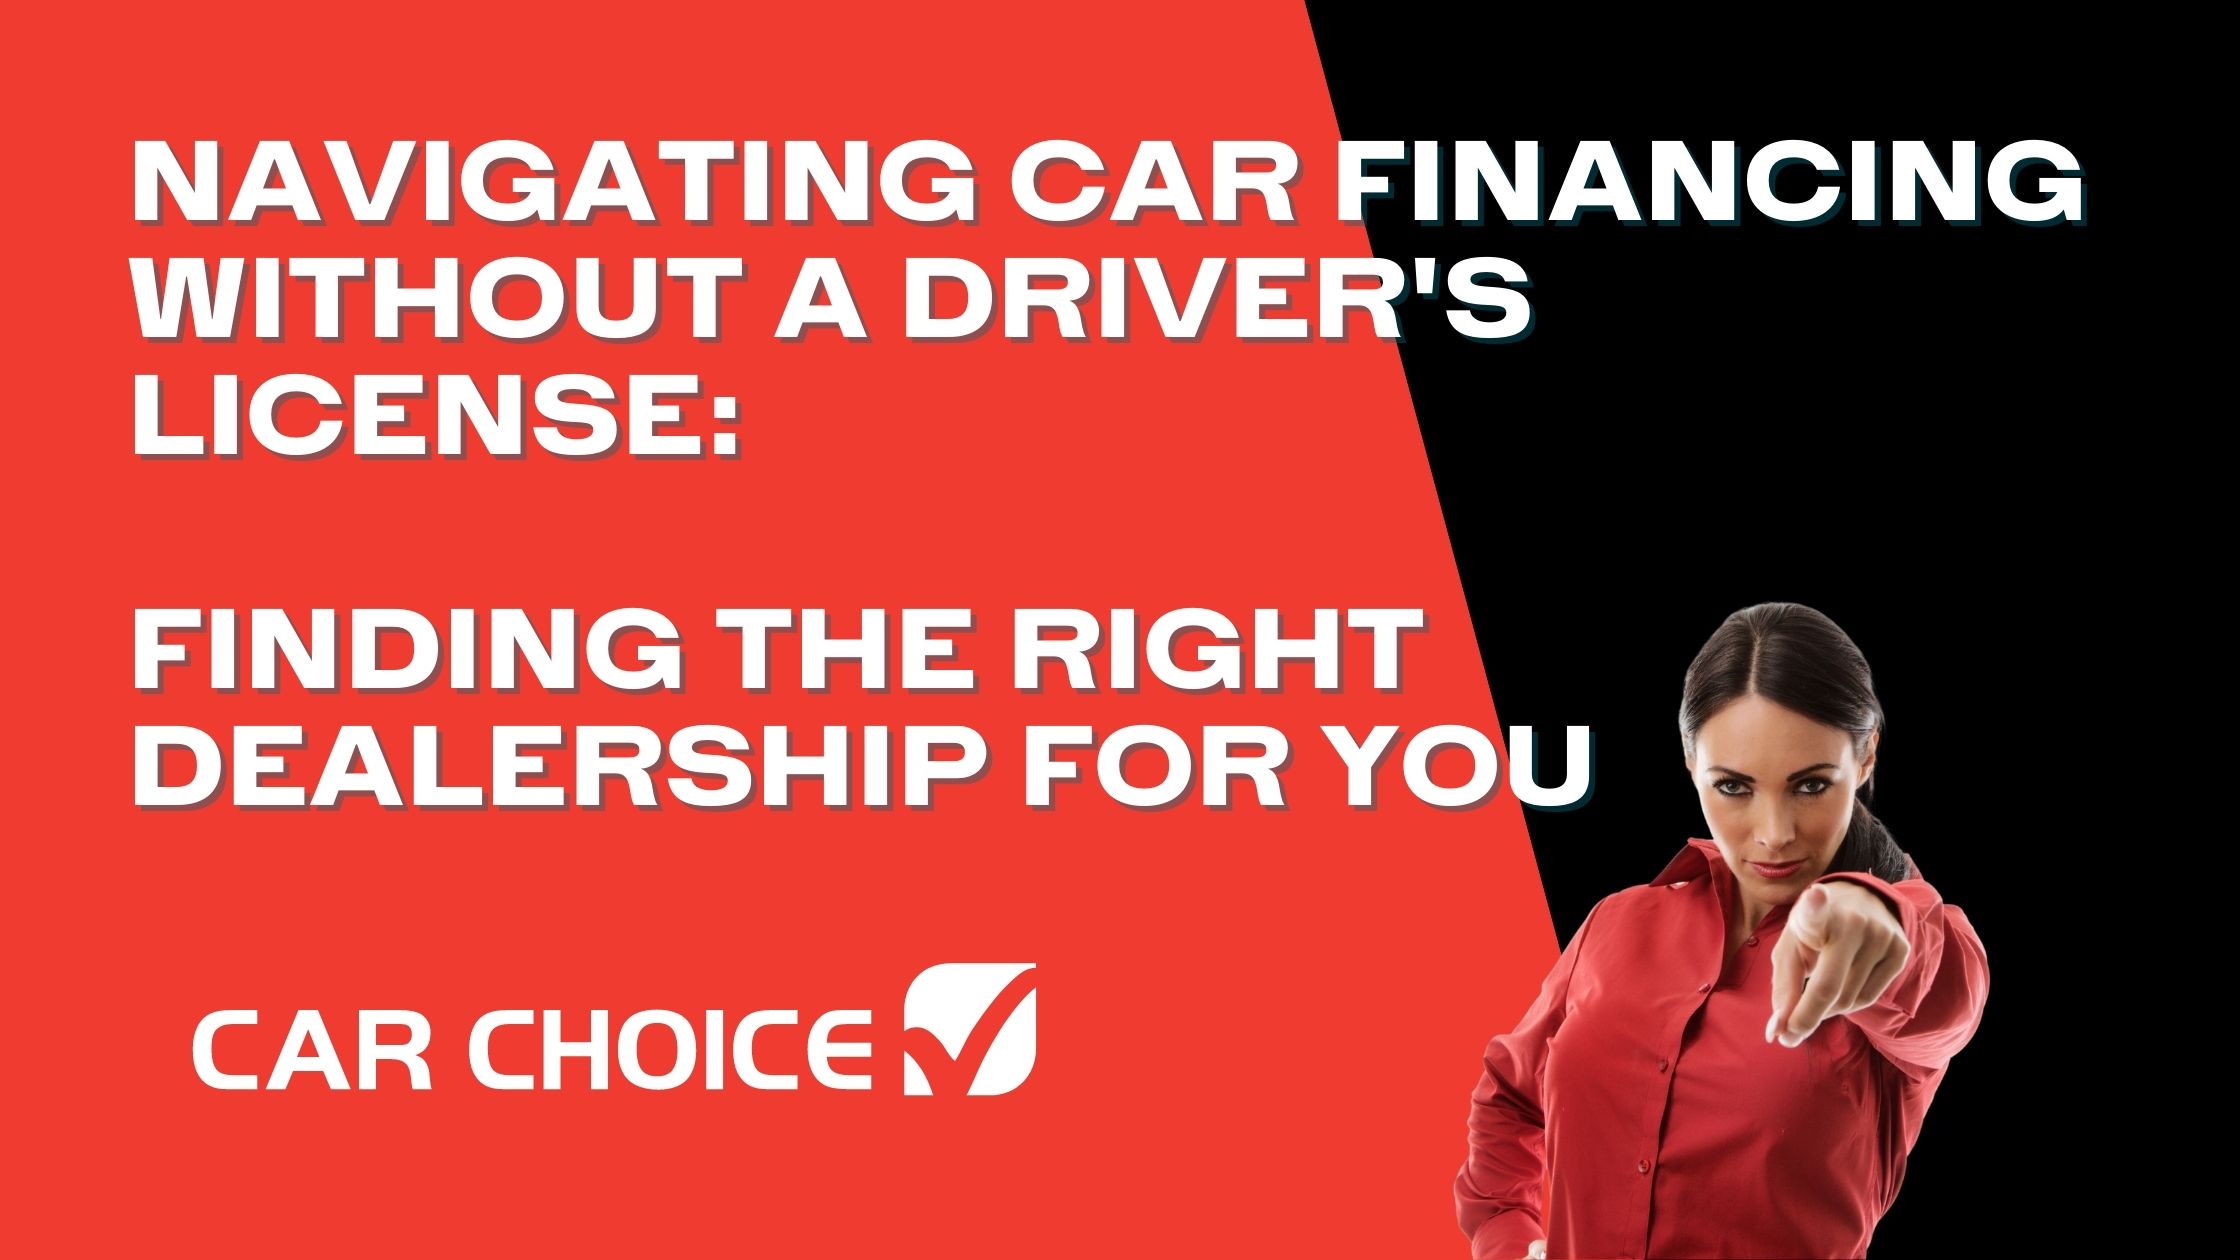 Navigating Car Financing Without a Driver's License: Finding the Right Dealership for You